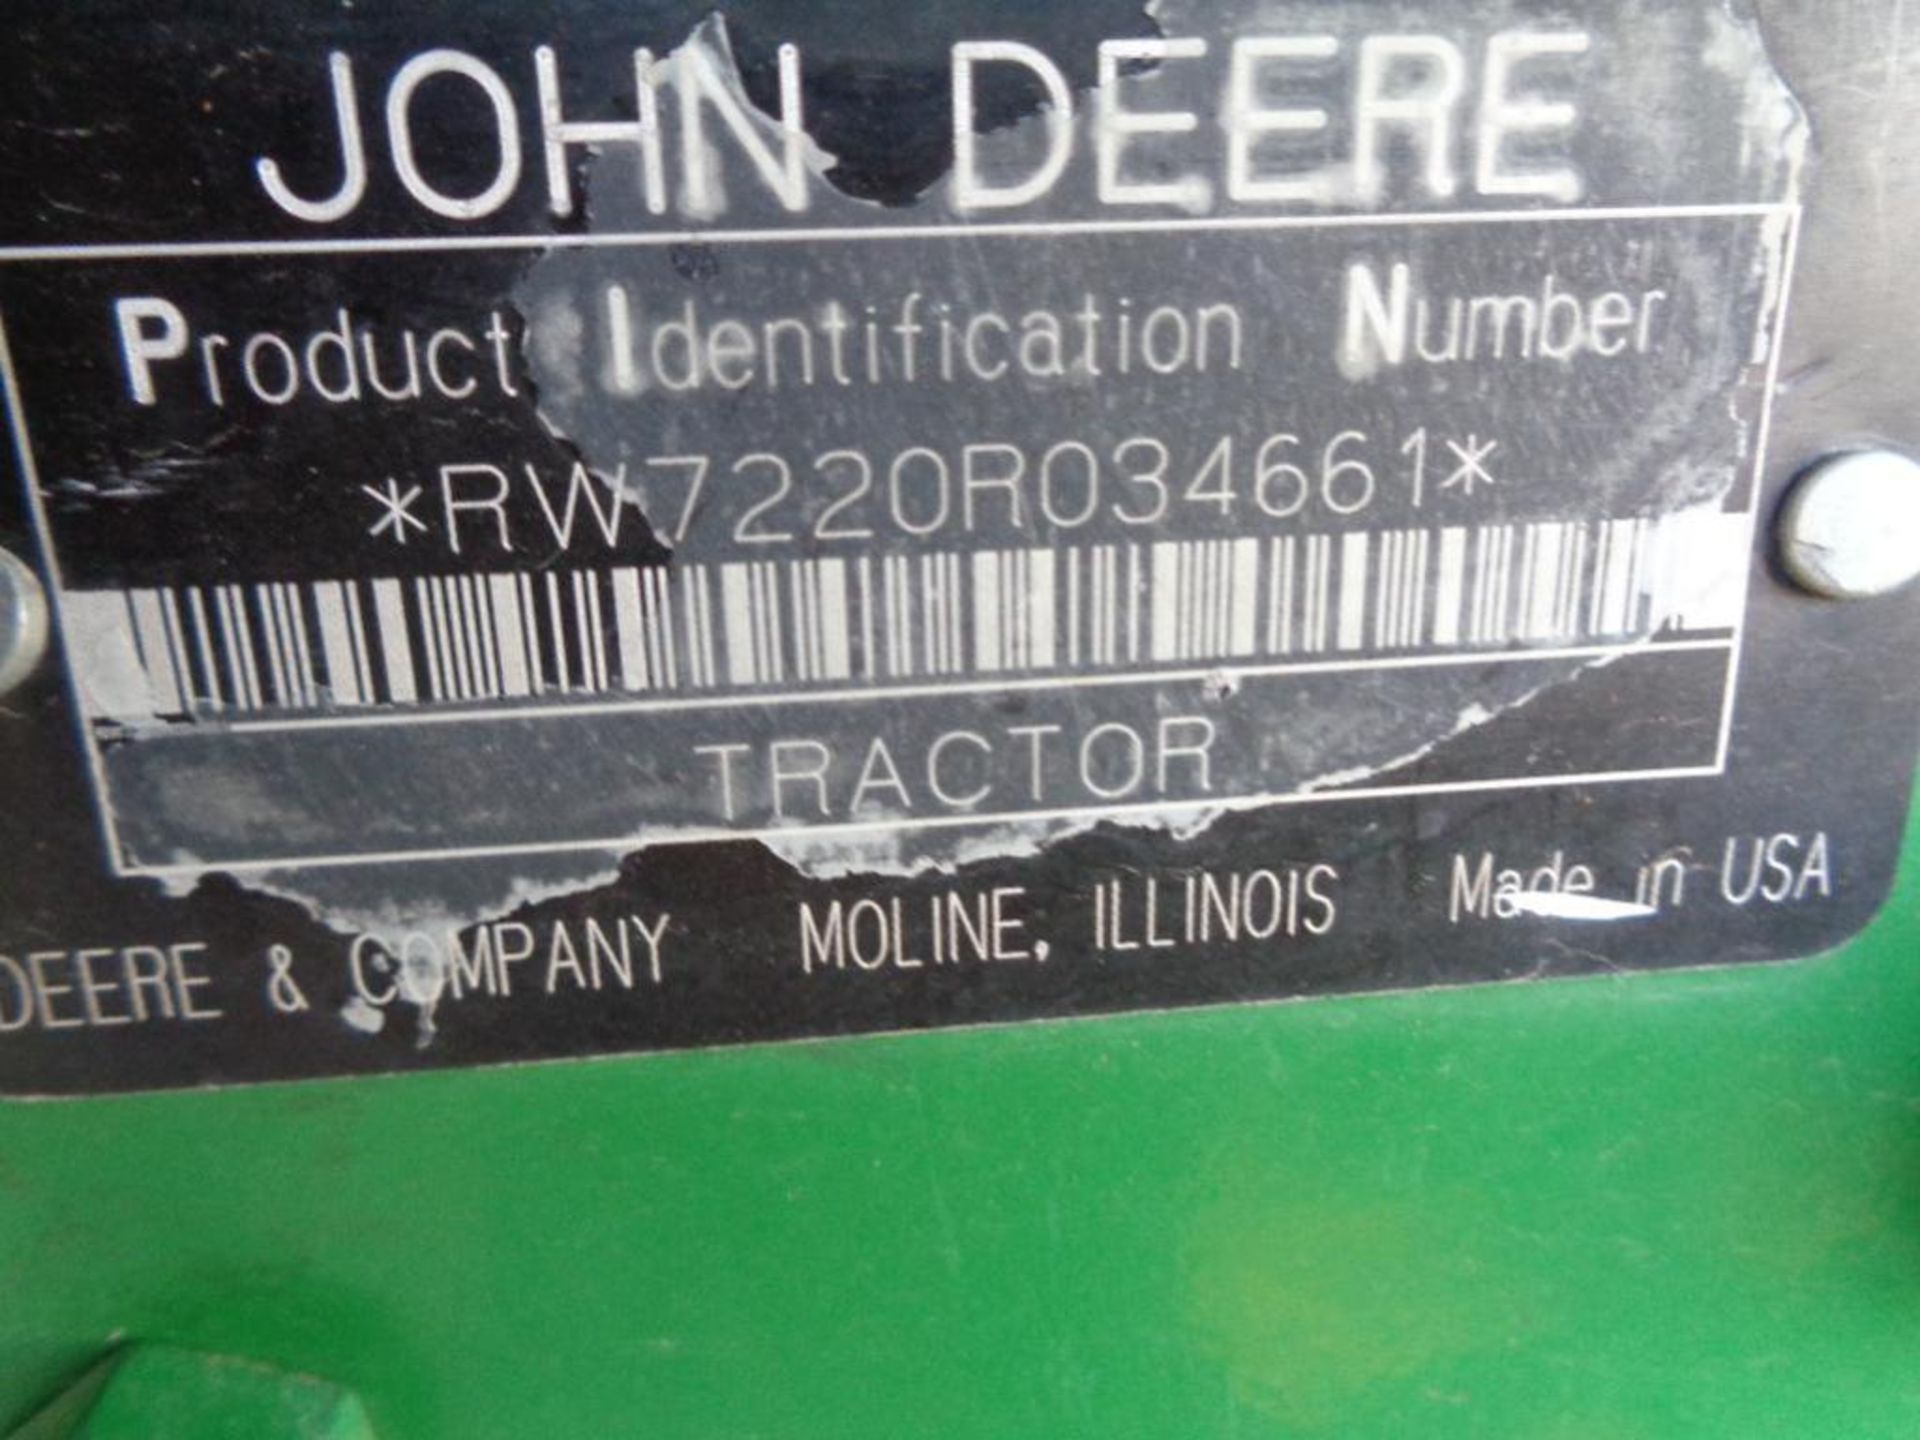 2005 John Deere 7220 Farm Tractor s/n 034661 Cab, a/c, 3pt, pto,hyd outlets, 4732 hrs - Image 6 of 7